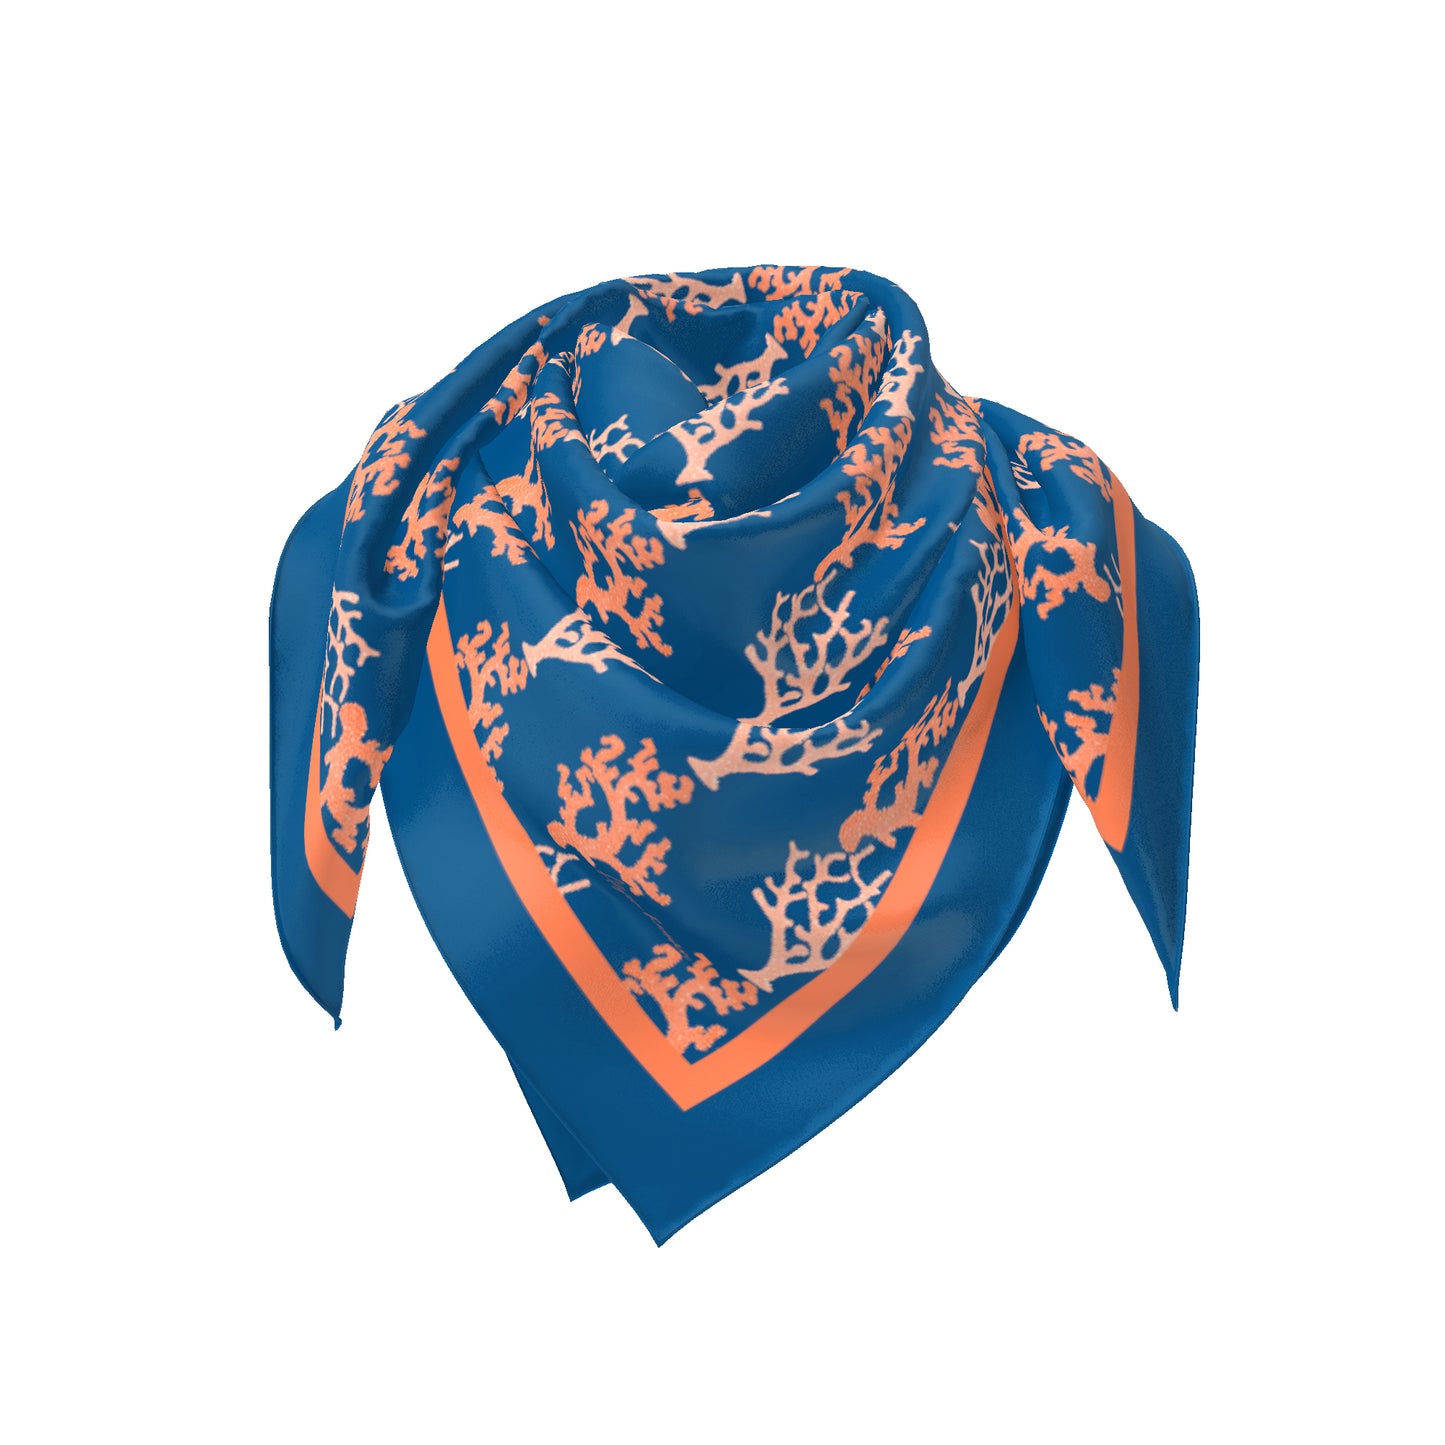 Sea Coral Branches Satin Square Scarf, Navy Blue & Orange, Two Sizes